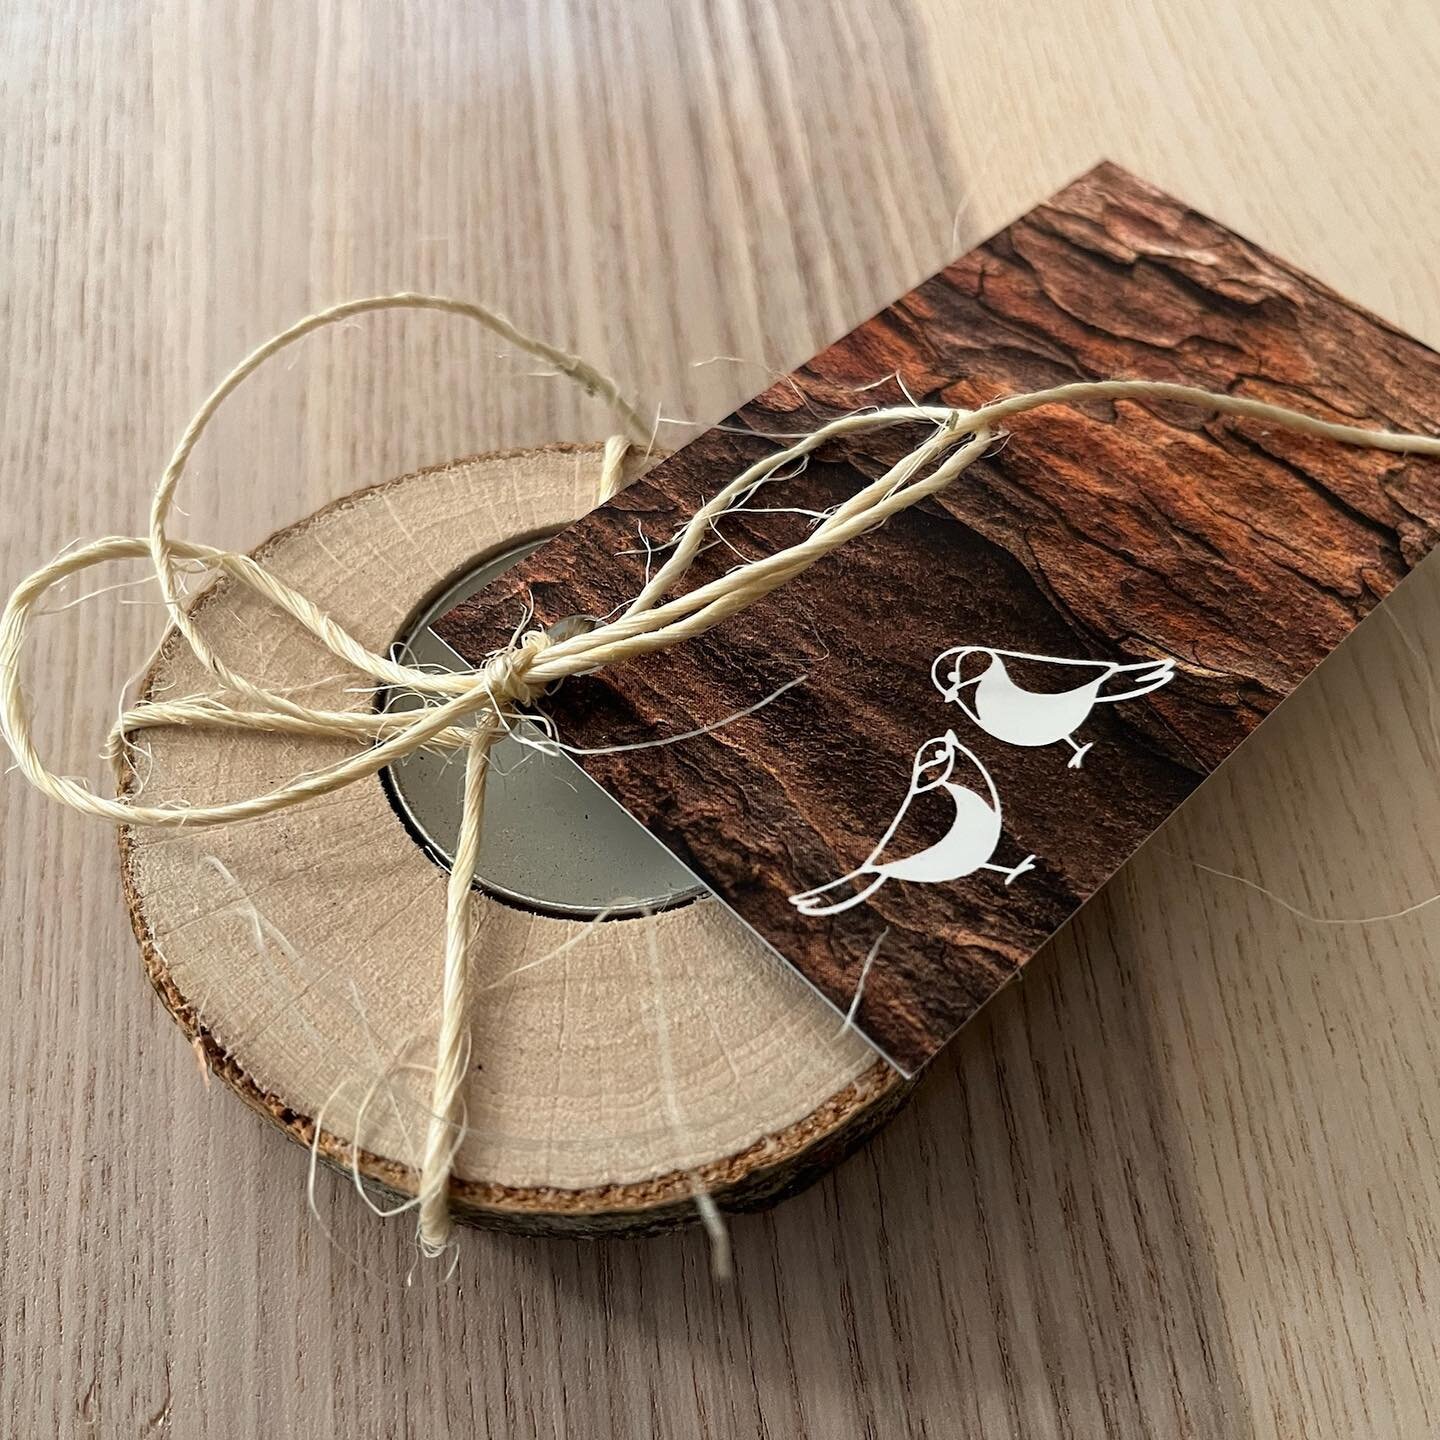 A little parting gift for all our wonderful guests. Real wood slice tea candle to remember your stay @visitwoodlands xox

#bowenisland #woodlandsbowenisland #bowenislandtourism #explorebc #pnw #pnwonderland #beautifuldestinations #tourismbc #hellobc 